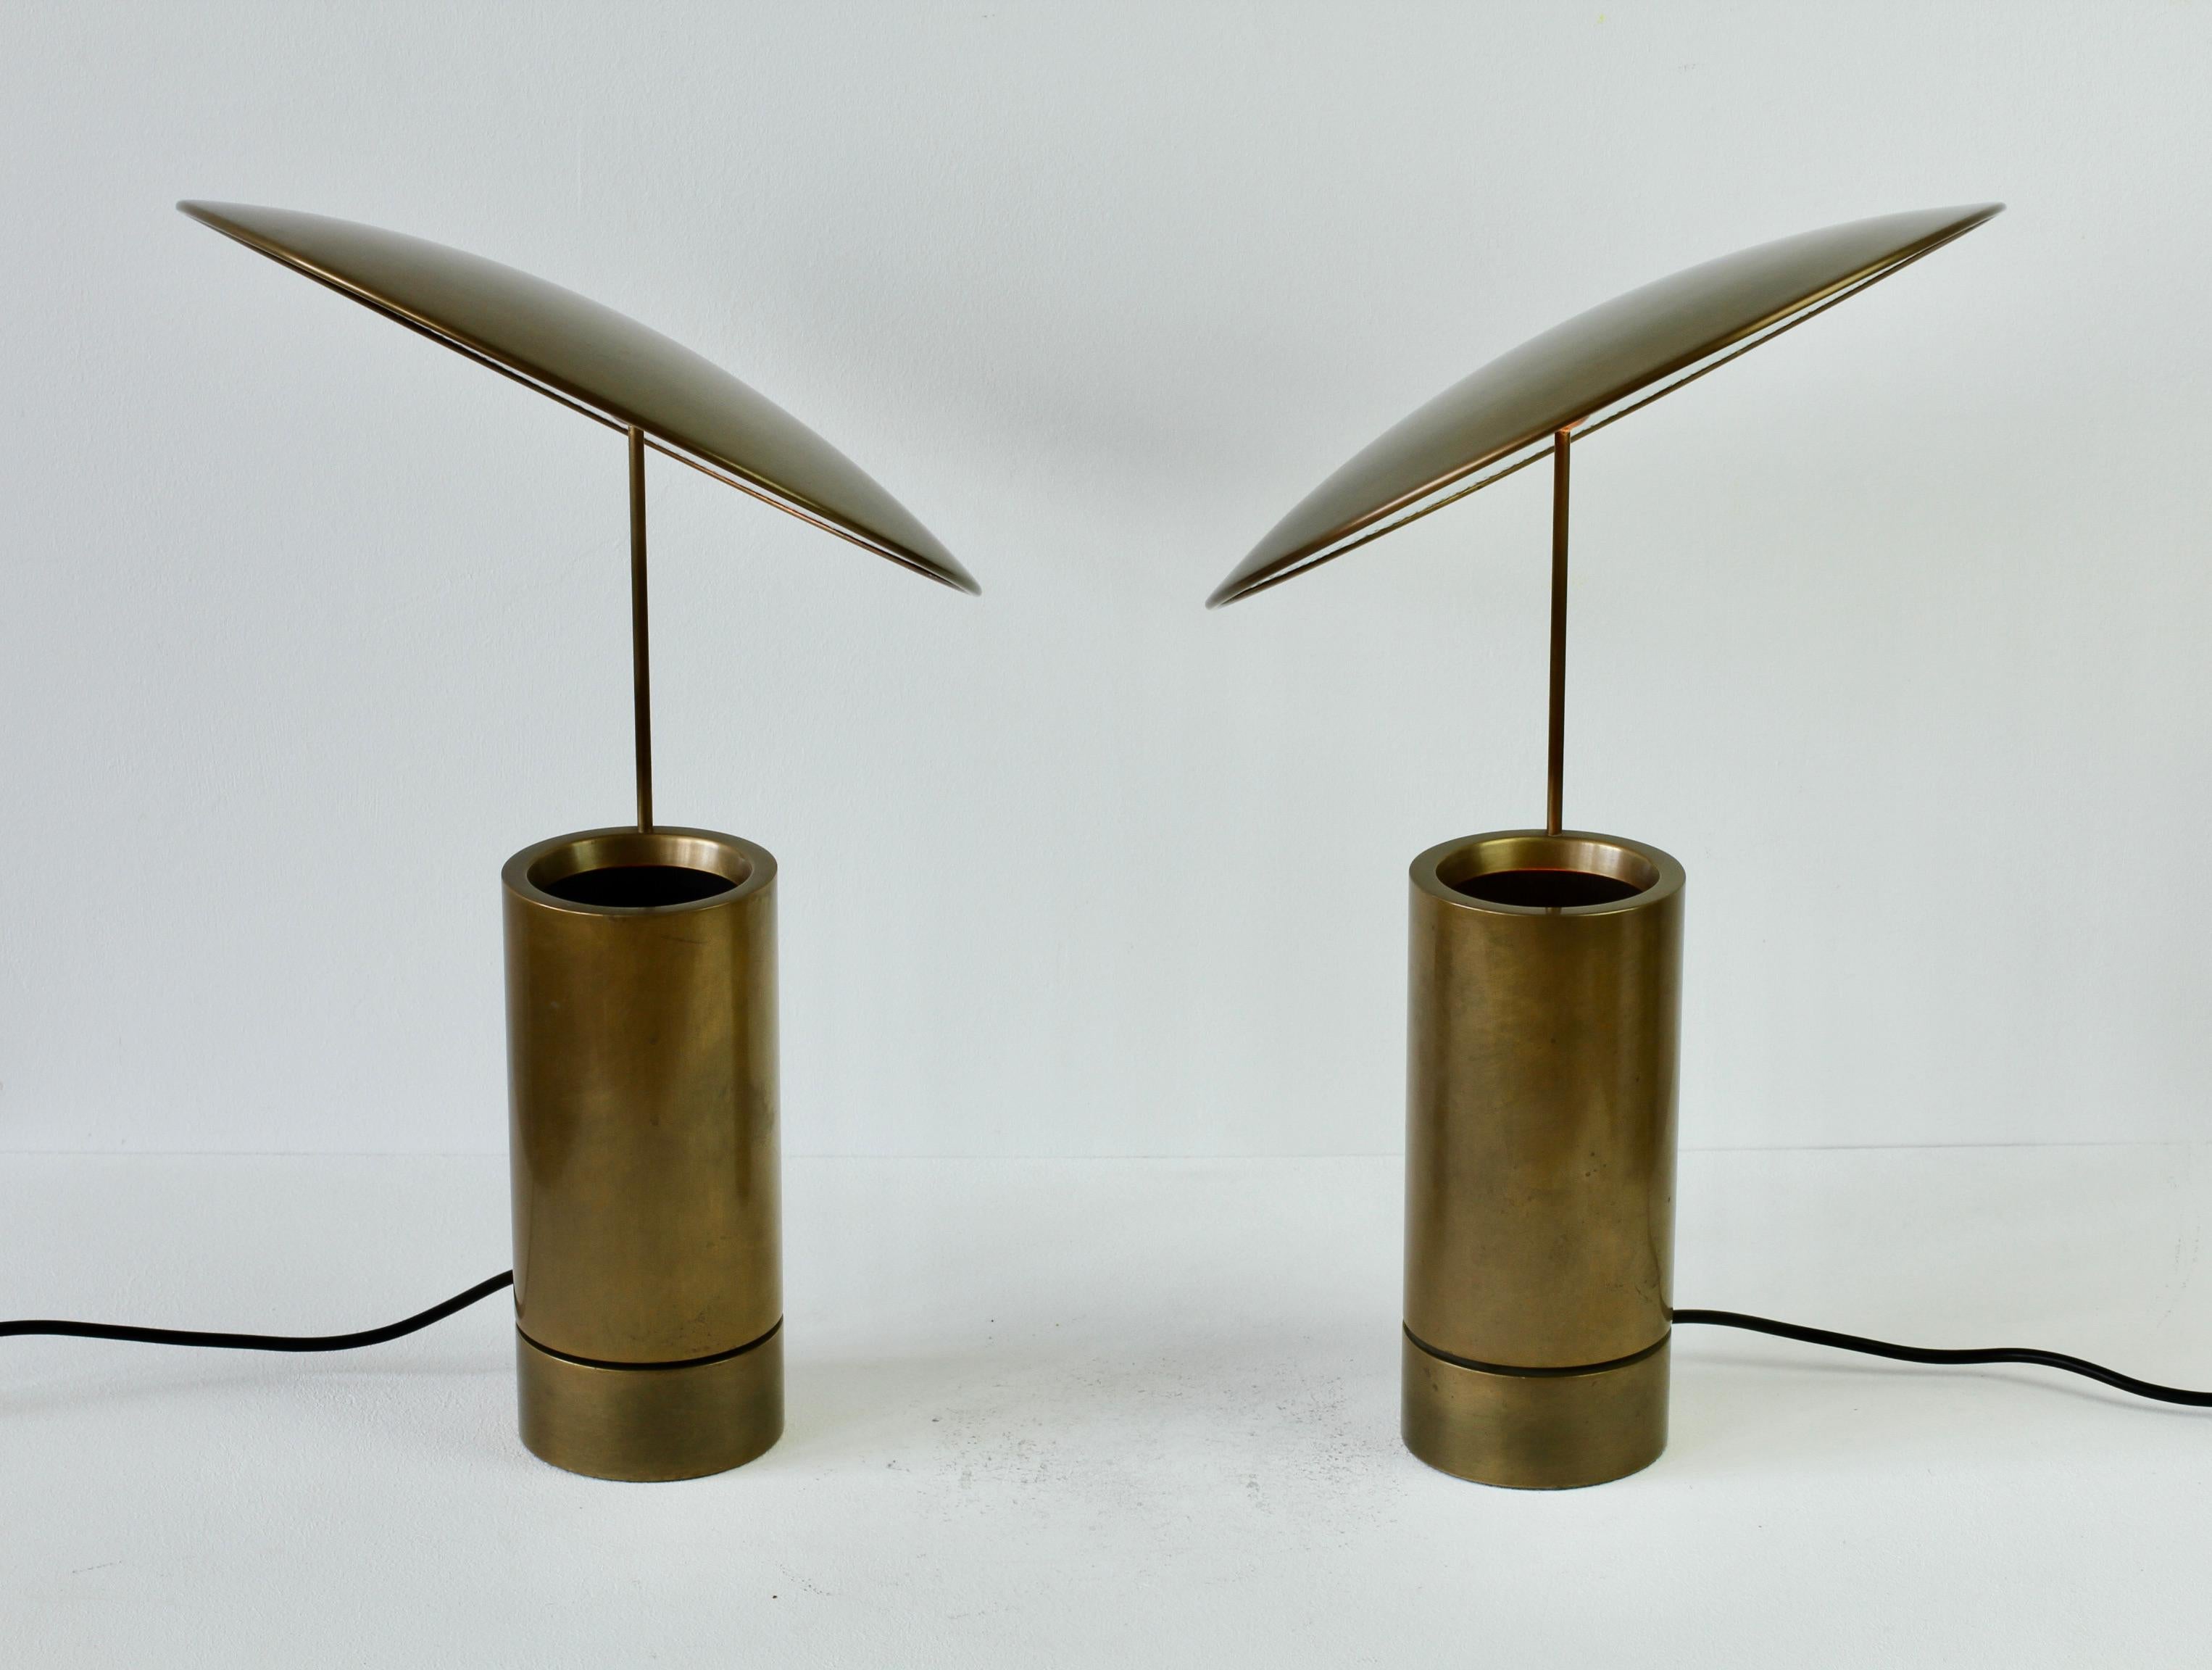 Metal Florian Schulz Rare Pair or 'TOS' Vintage Modernist Brushed Brass Table Lamps